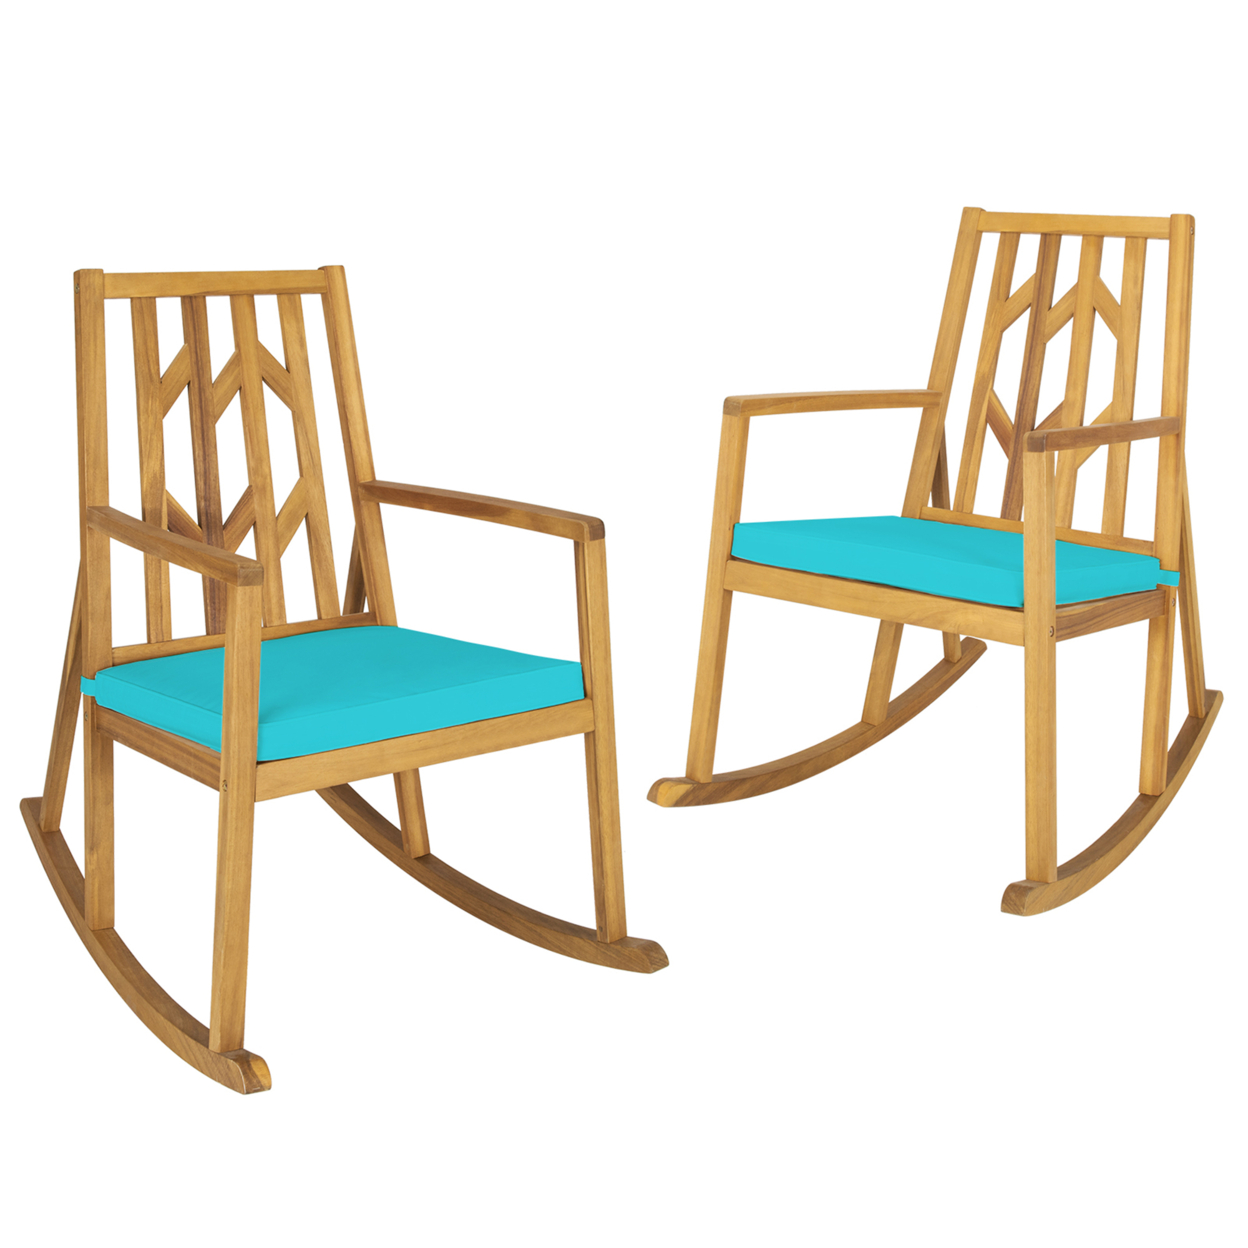 Set Of 2 Outdoor Acacia Wood Rocking Chair Wooden Patio Rocker W/ Turquoise Cushion